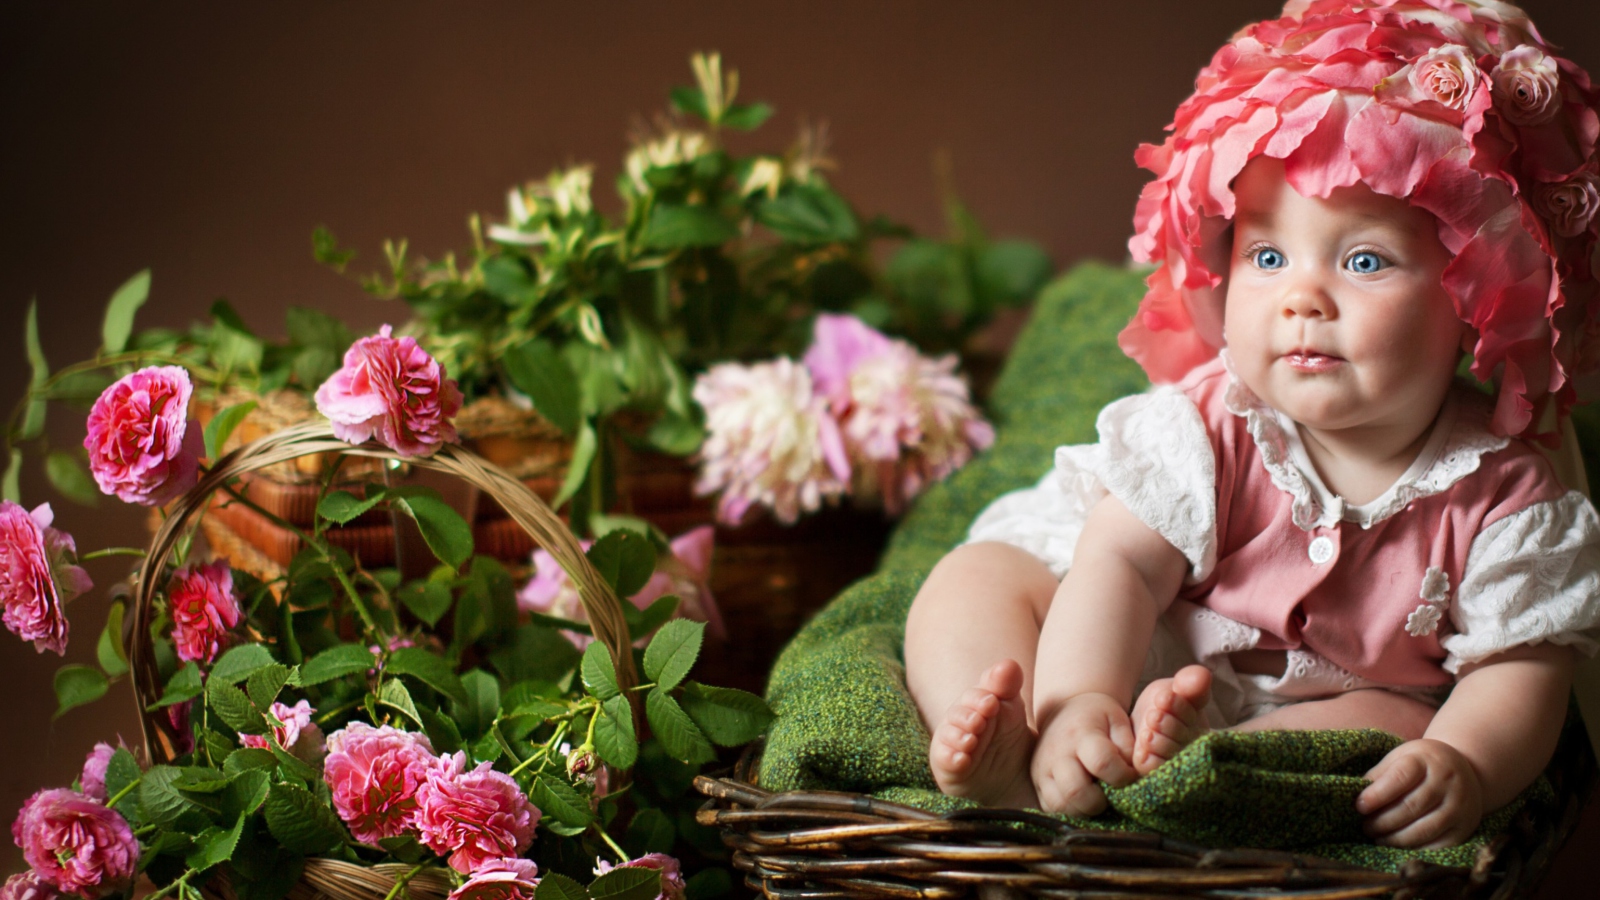 Cute Baby With Blue Eyes And Roses wallpaper 1600x900